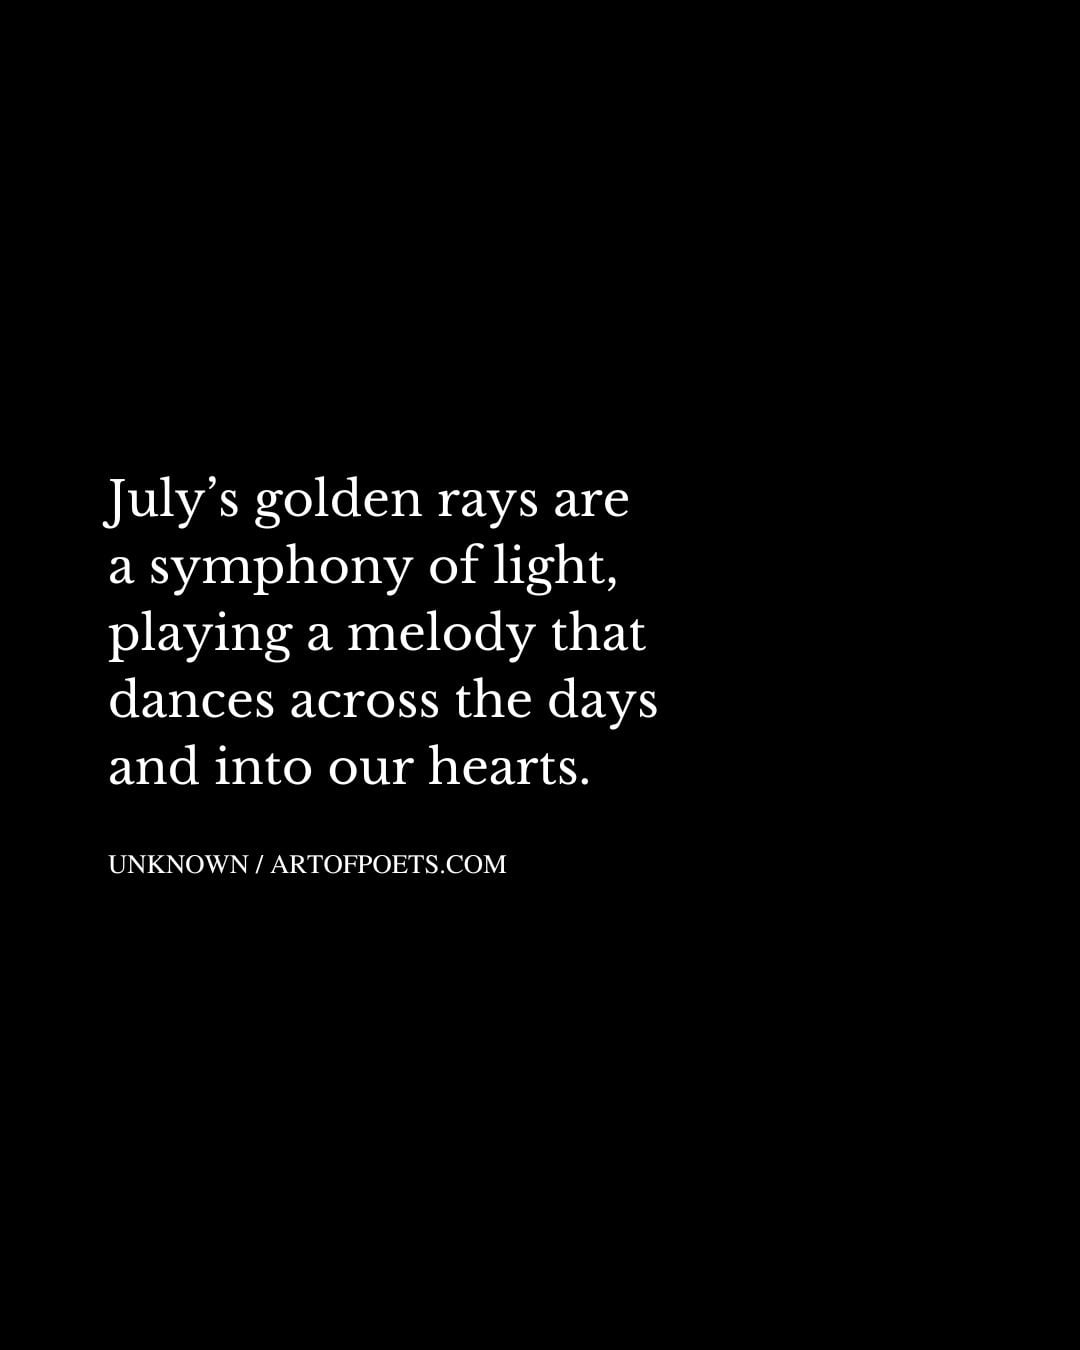 Julys golden rays are a symphony of light playing a melody that dances across the days and into our hearts